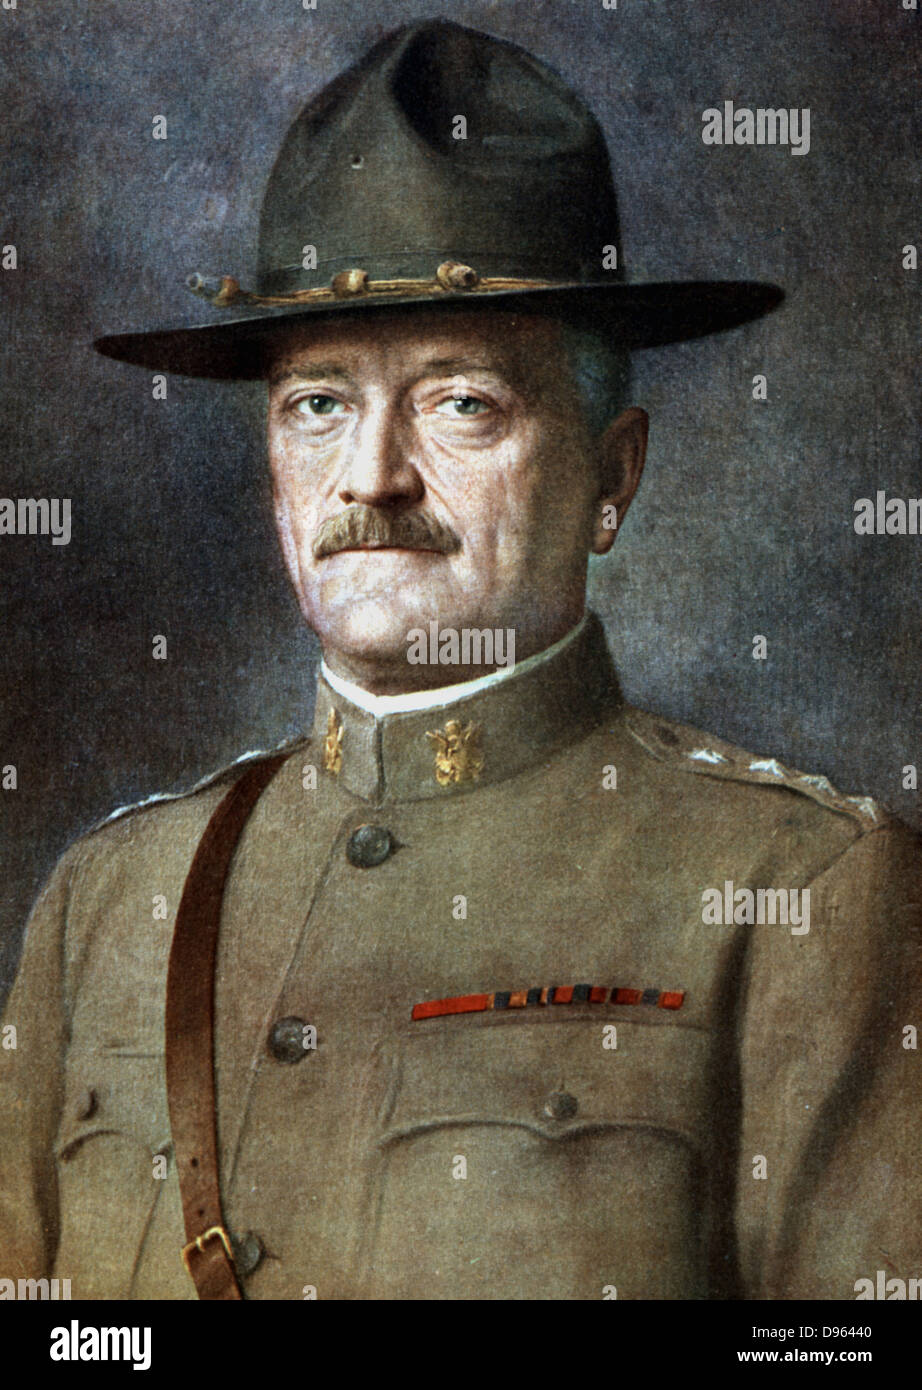 John Joseph Pershing (1860-1948)  American general. Commander-in-chief American Expeditionary Force in Europe 1917, US Army Chief of Staff 1921-1924. Stock Photo